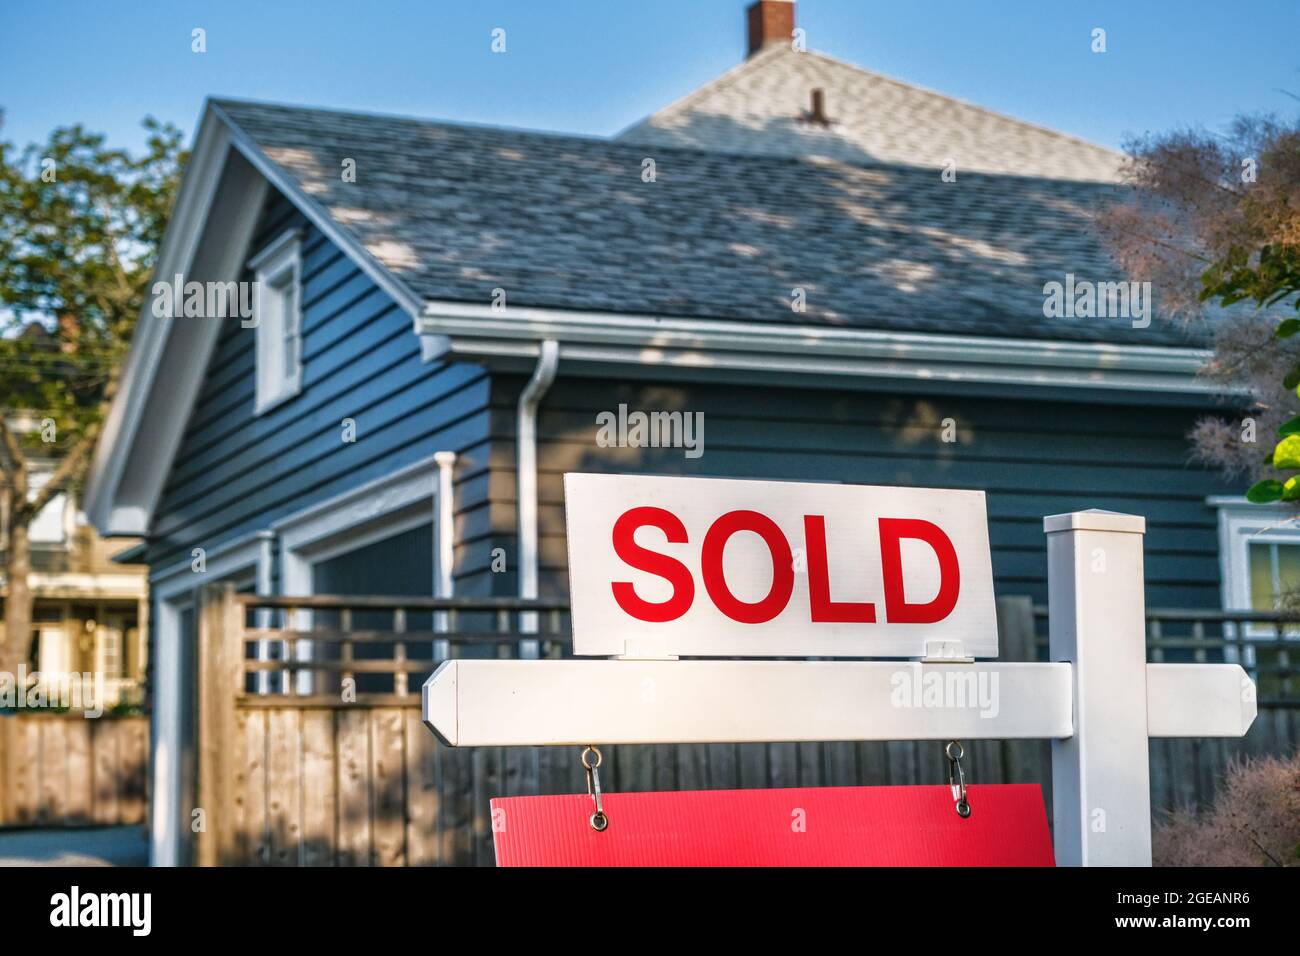 Sold sign in front of wooden house in Canada Stock Photo